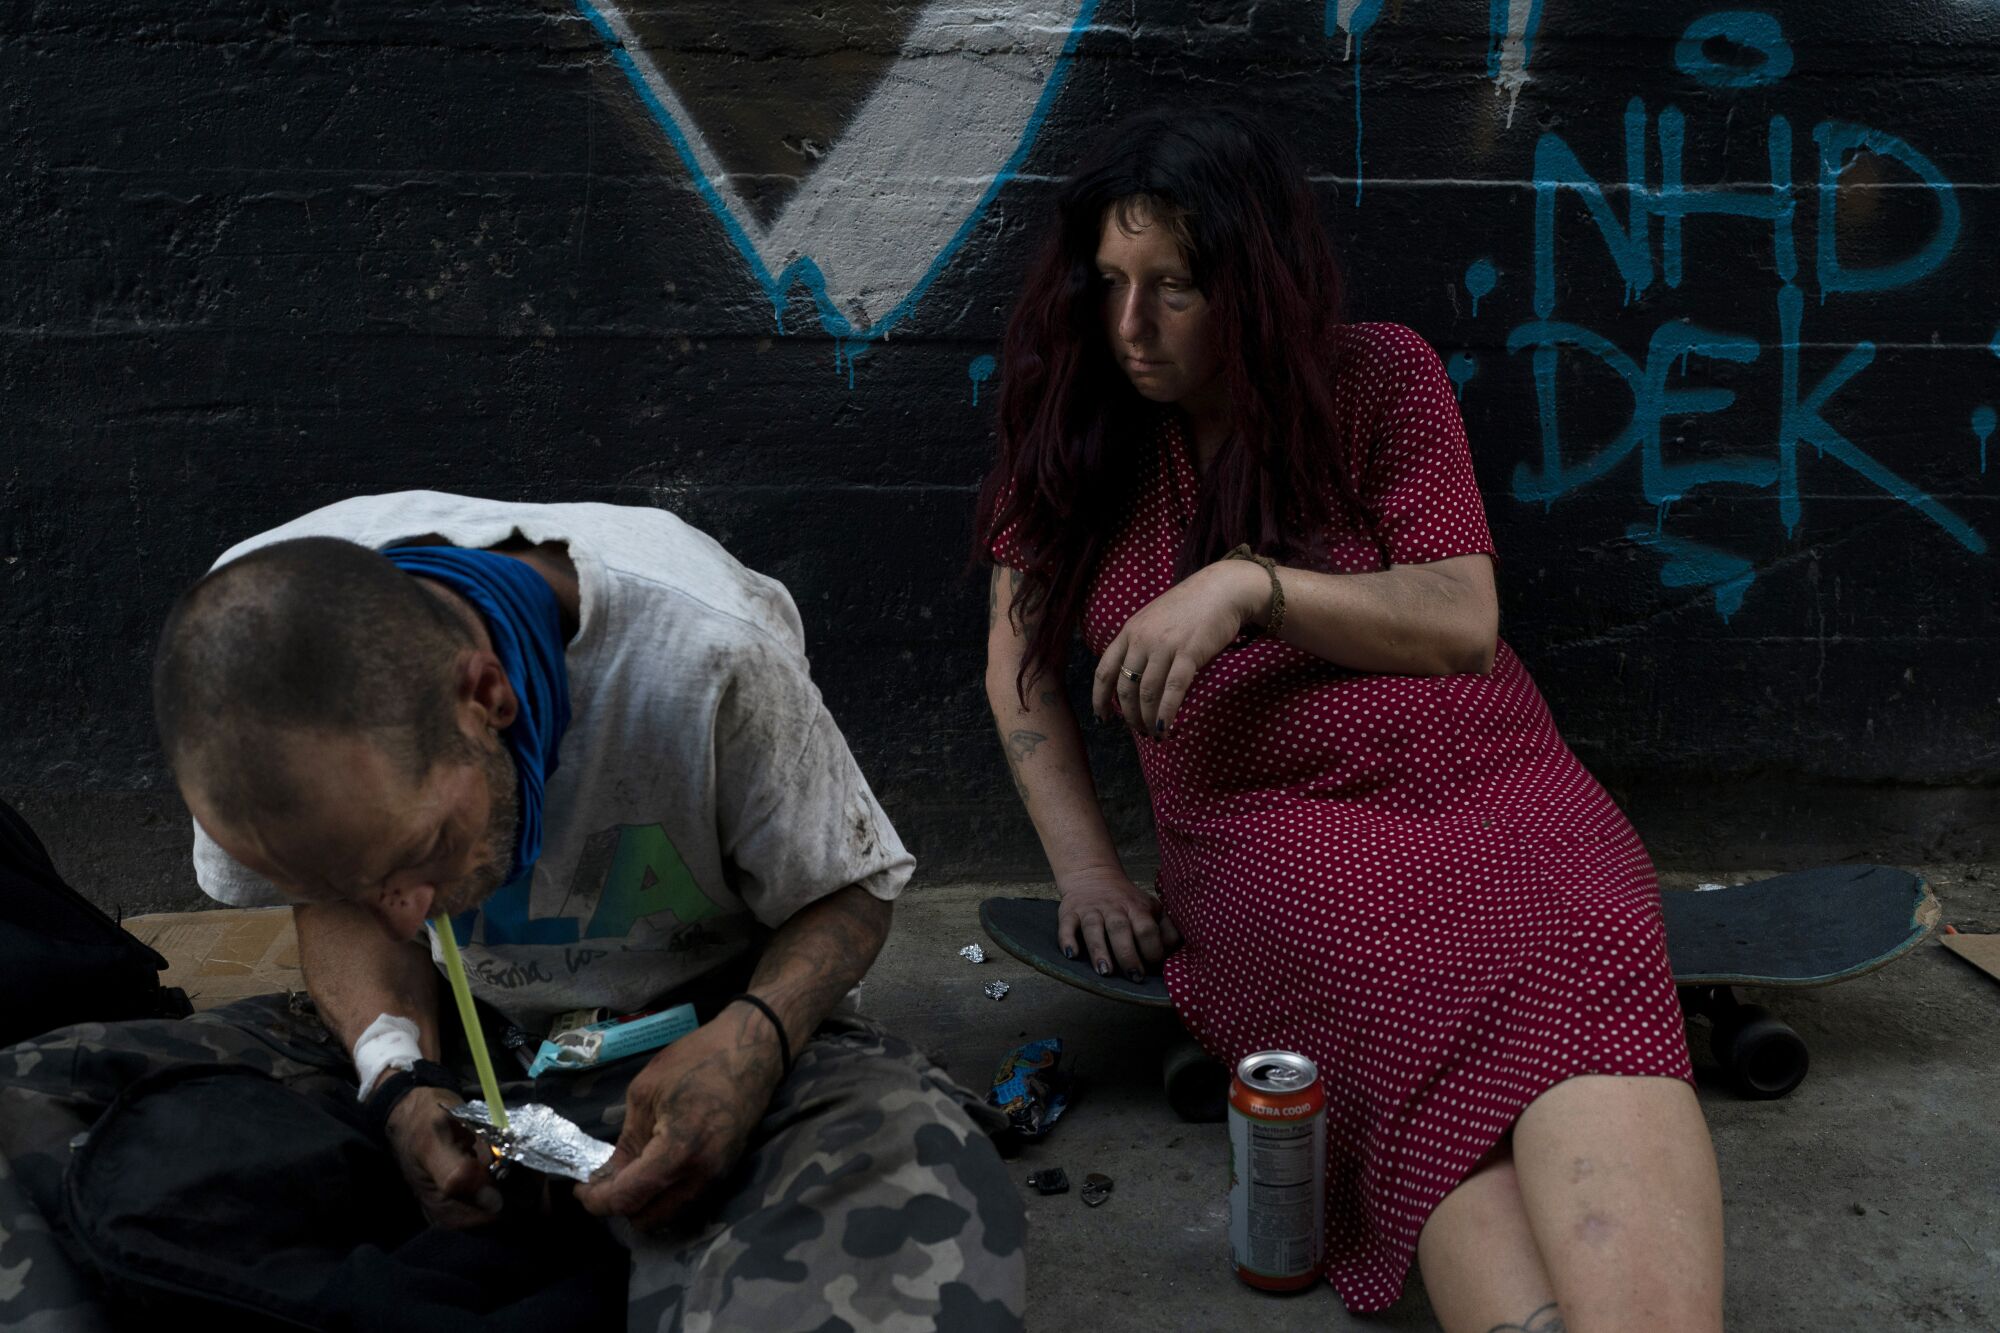 Jenn Bennett, who is high on fentanyl, sits on her skateboard as her friend Jesse Williams smokes the drug.